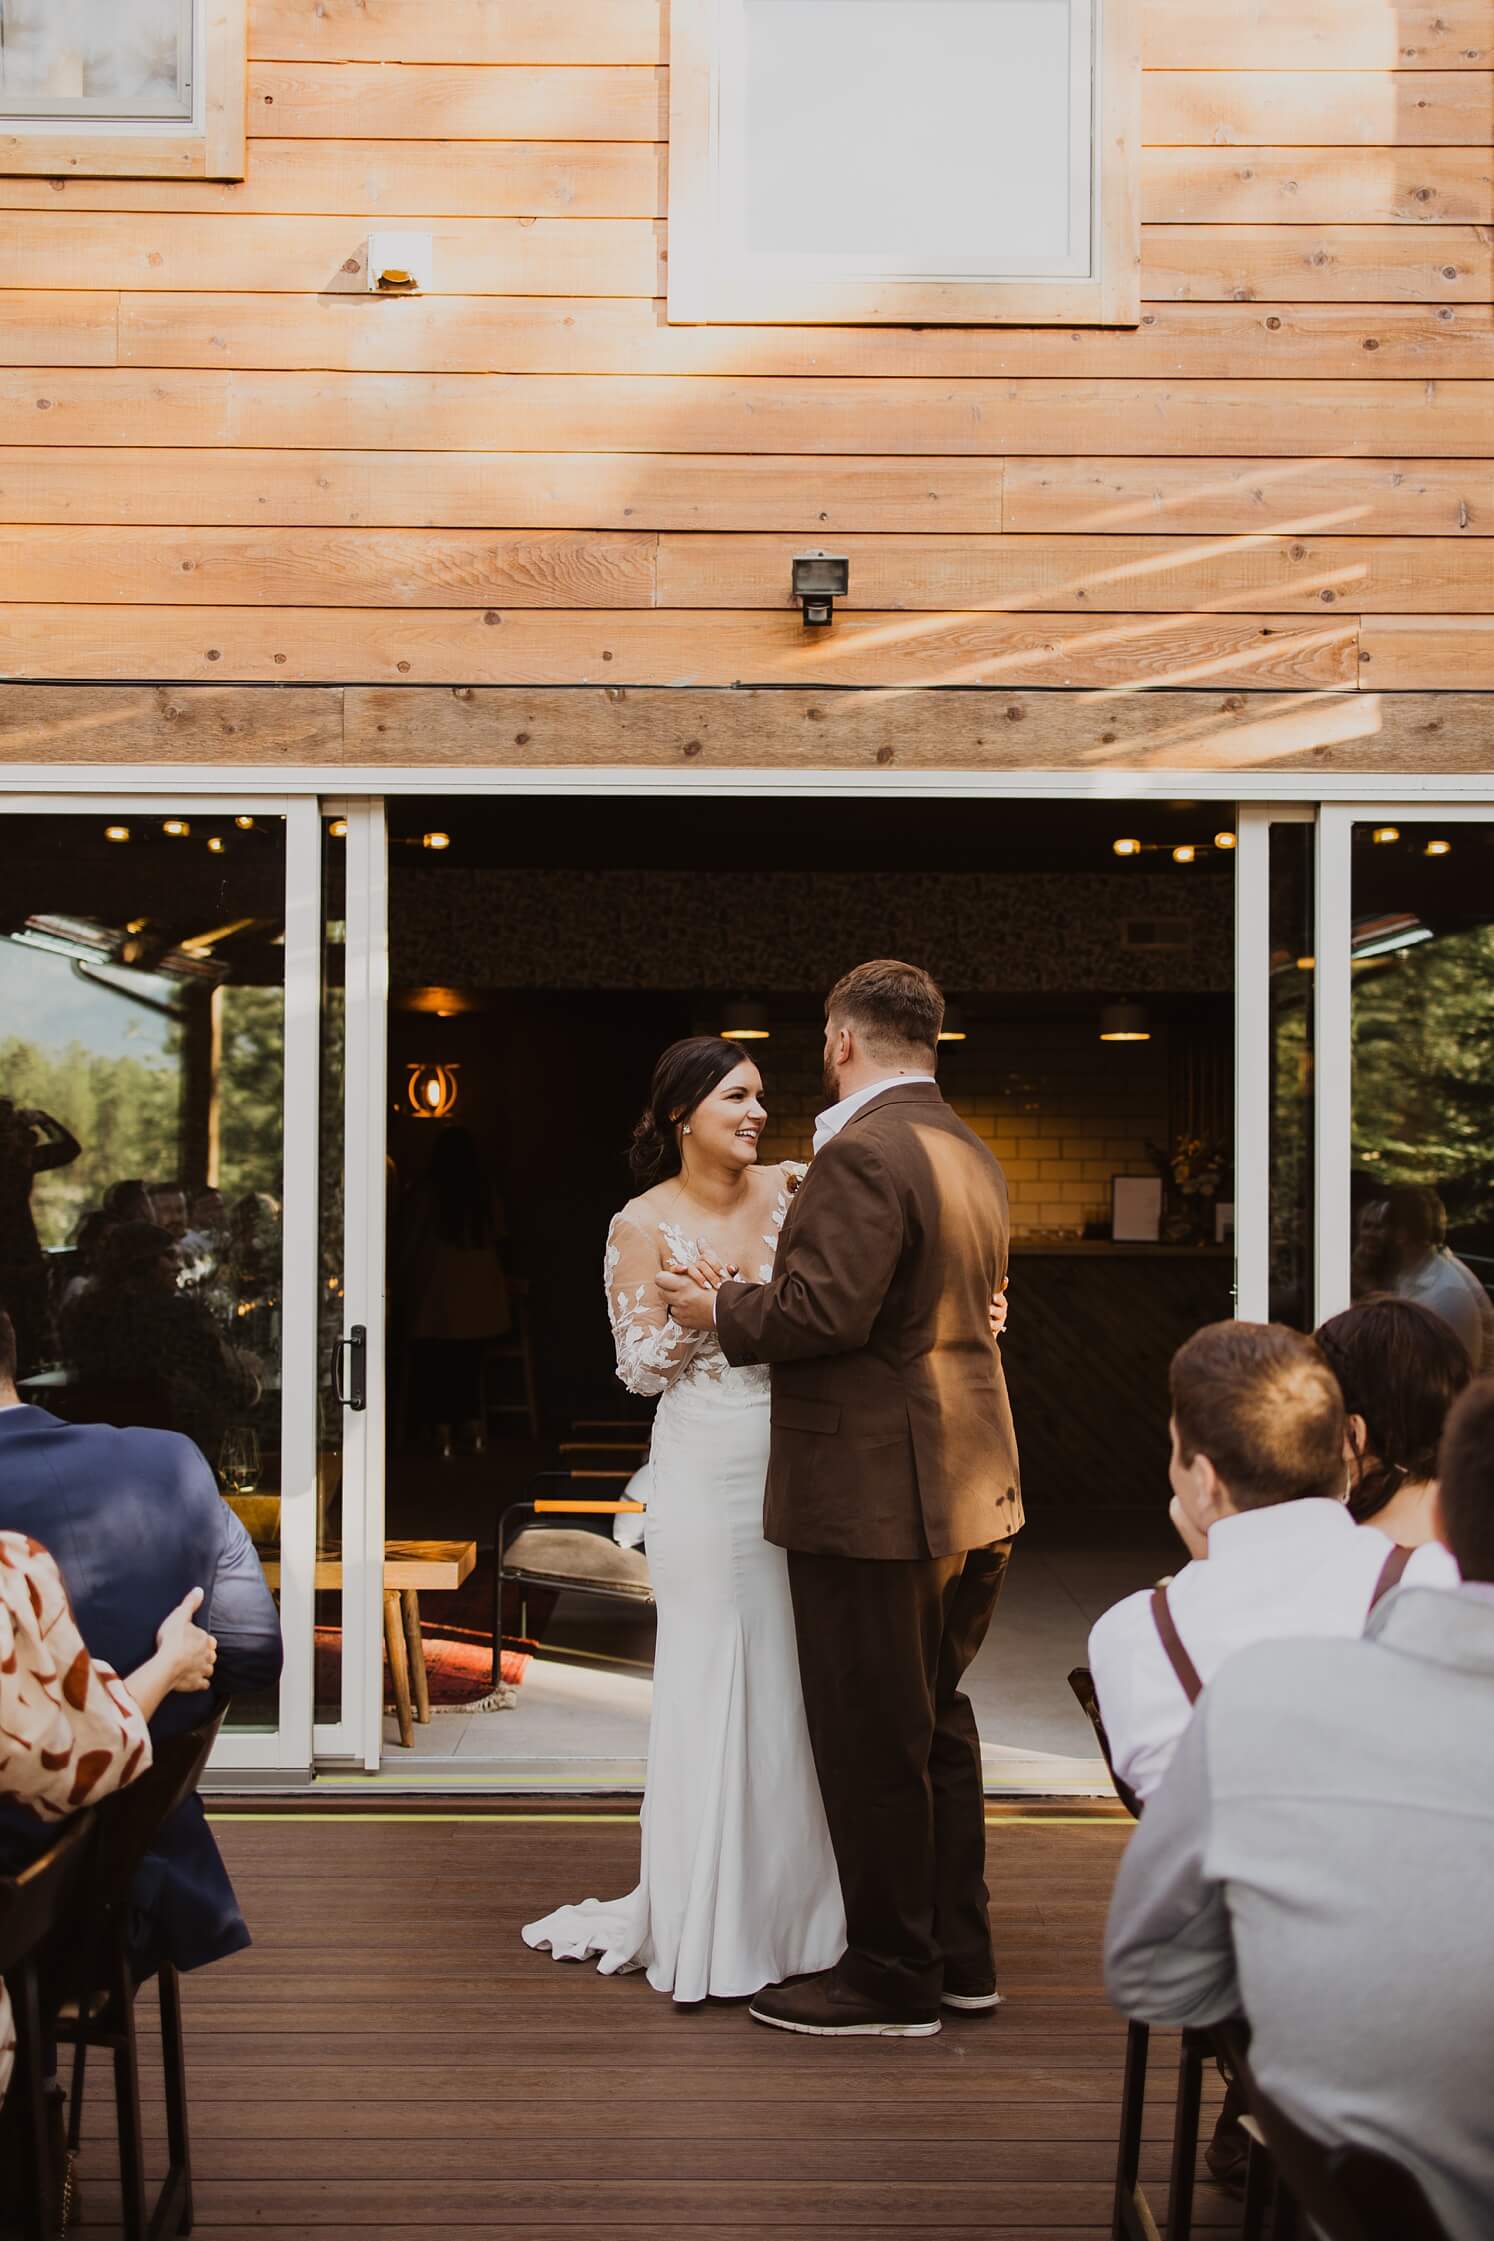 Bride and groom's first dance at Evergreen wedding venue | McArthur Weddings and Events